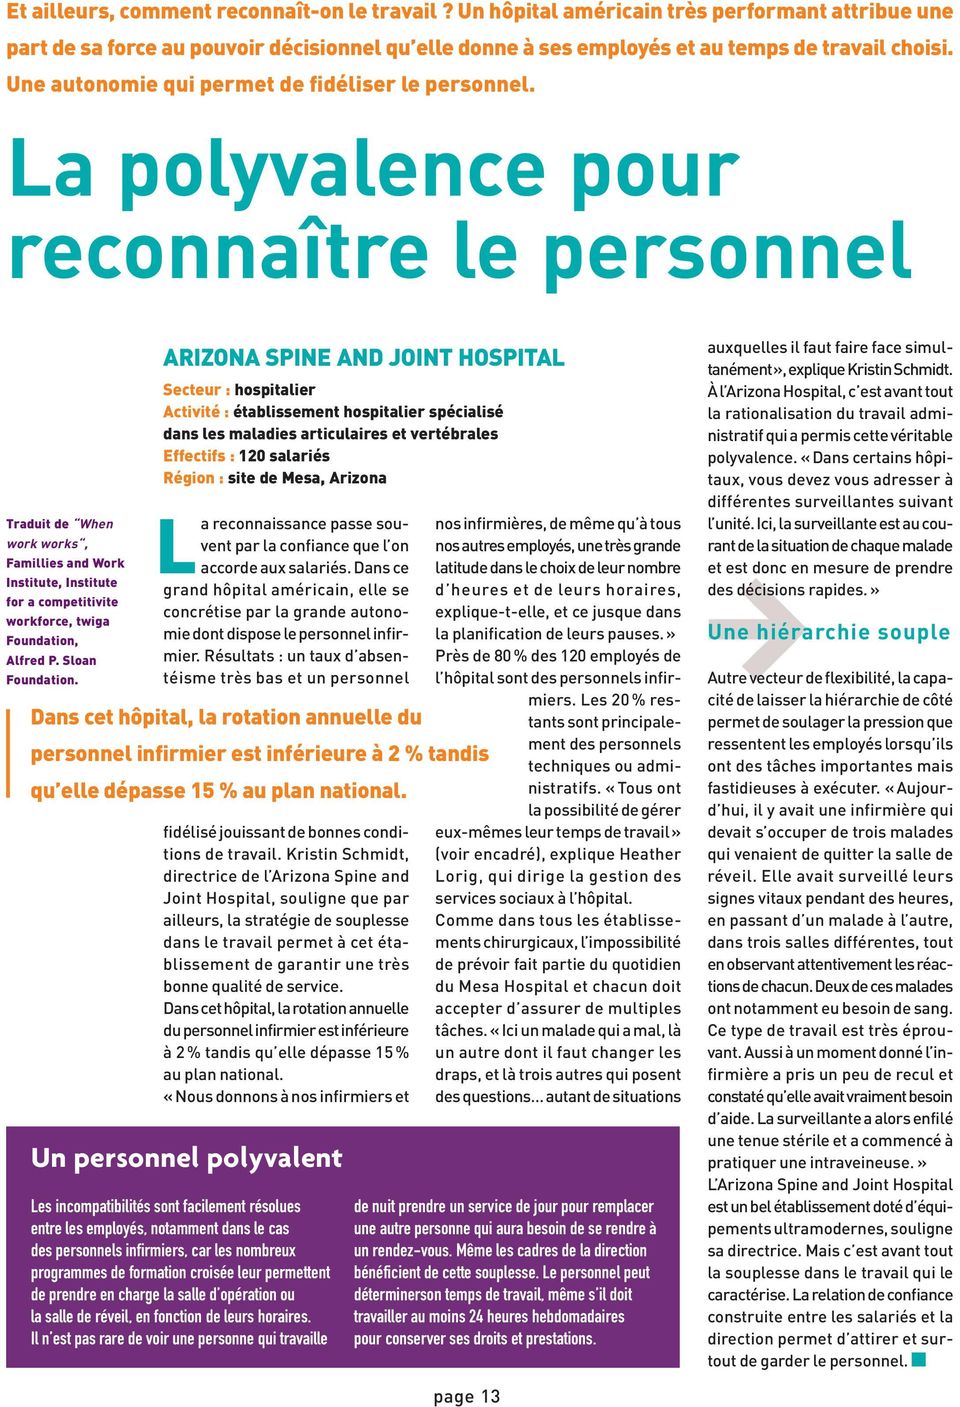 La polyvalence pour reconnaître le personnel Traduit de When work works, Famillies and Work Institute, Institute for a competitivite workforce, twiga Foundation, Alfred P. Sloan Foundation.